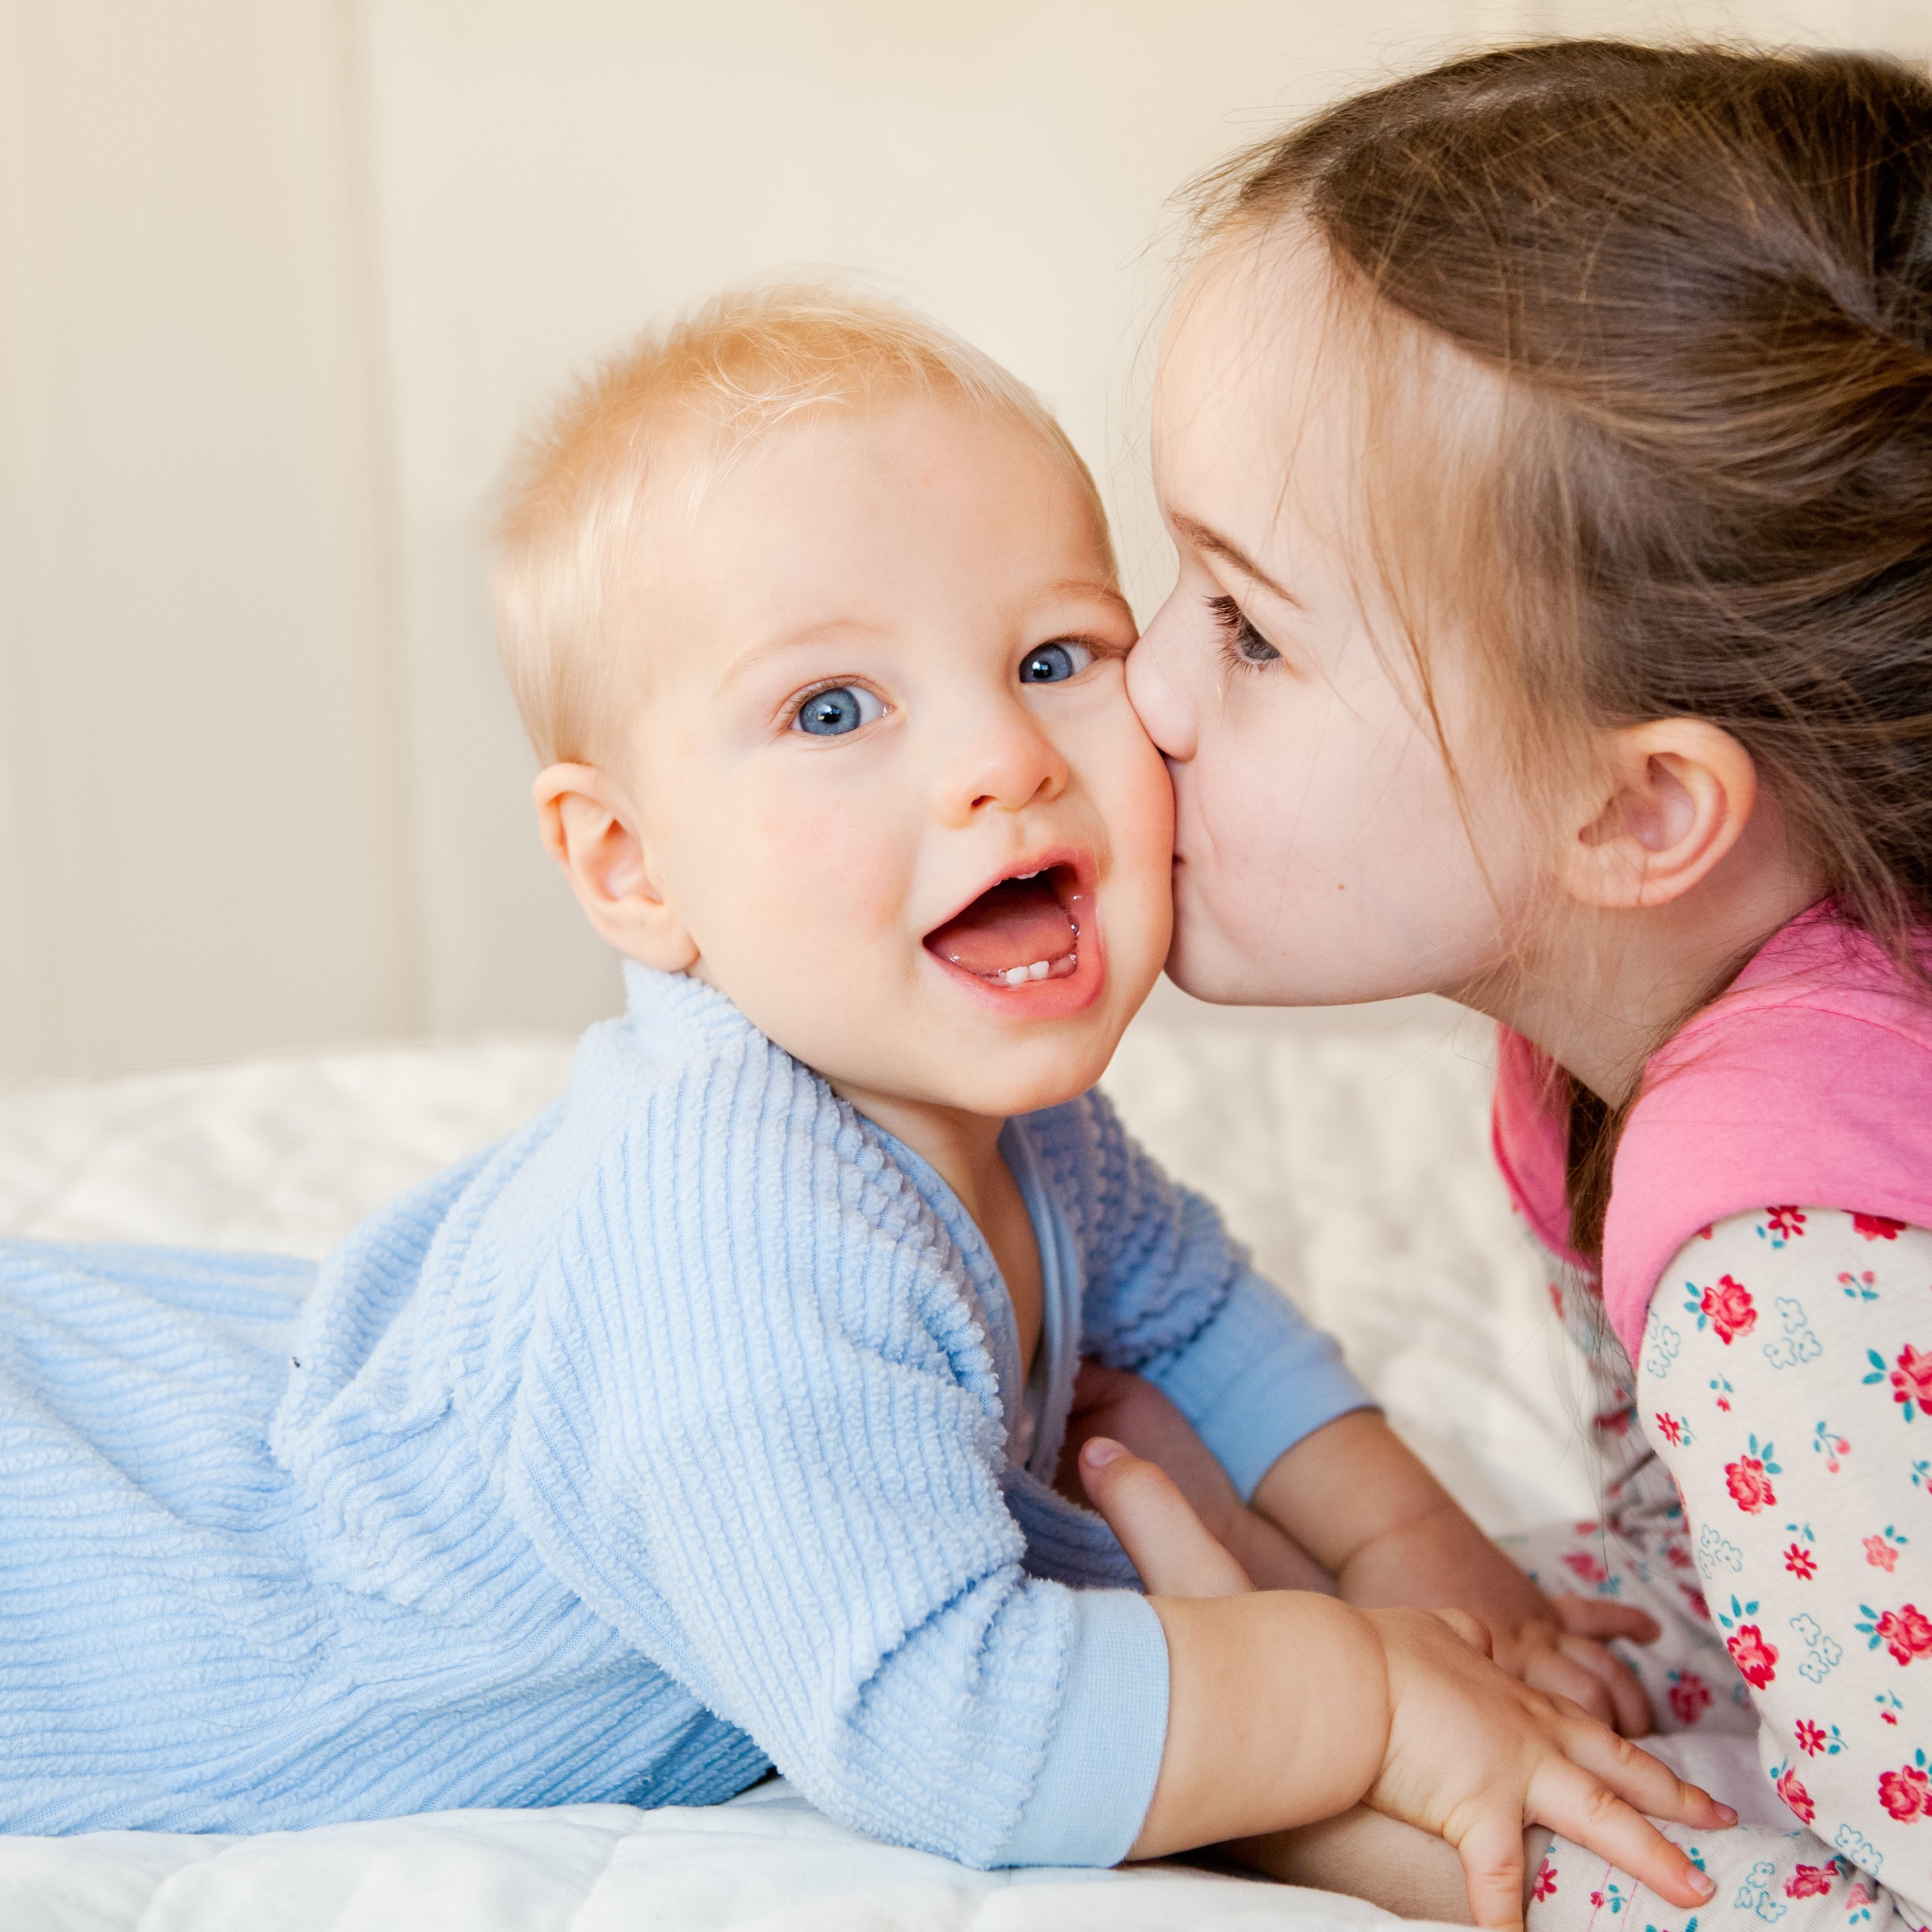 A sister kissing her little brother on the cheek. │Source: Shutterstock